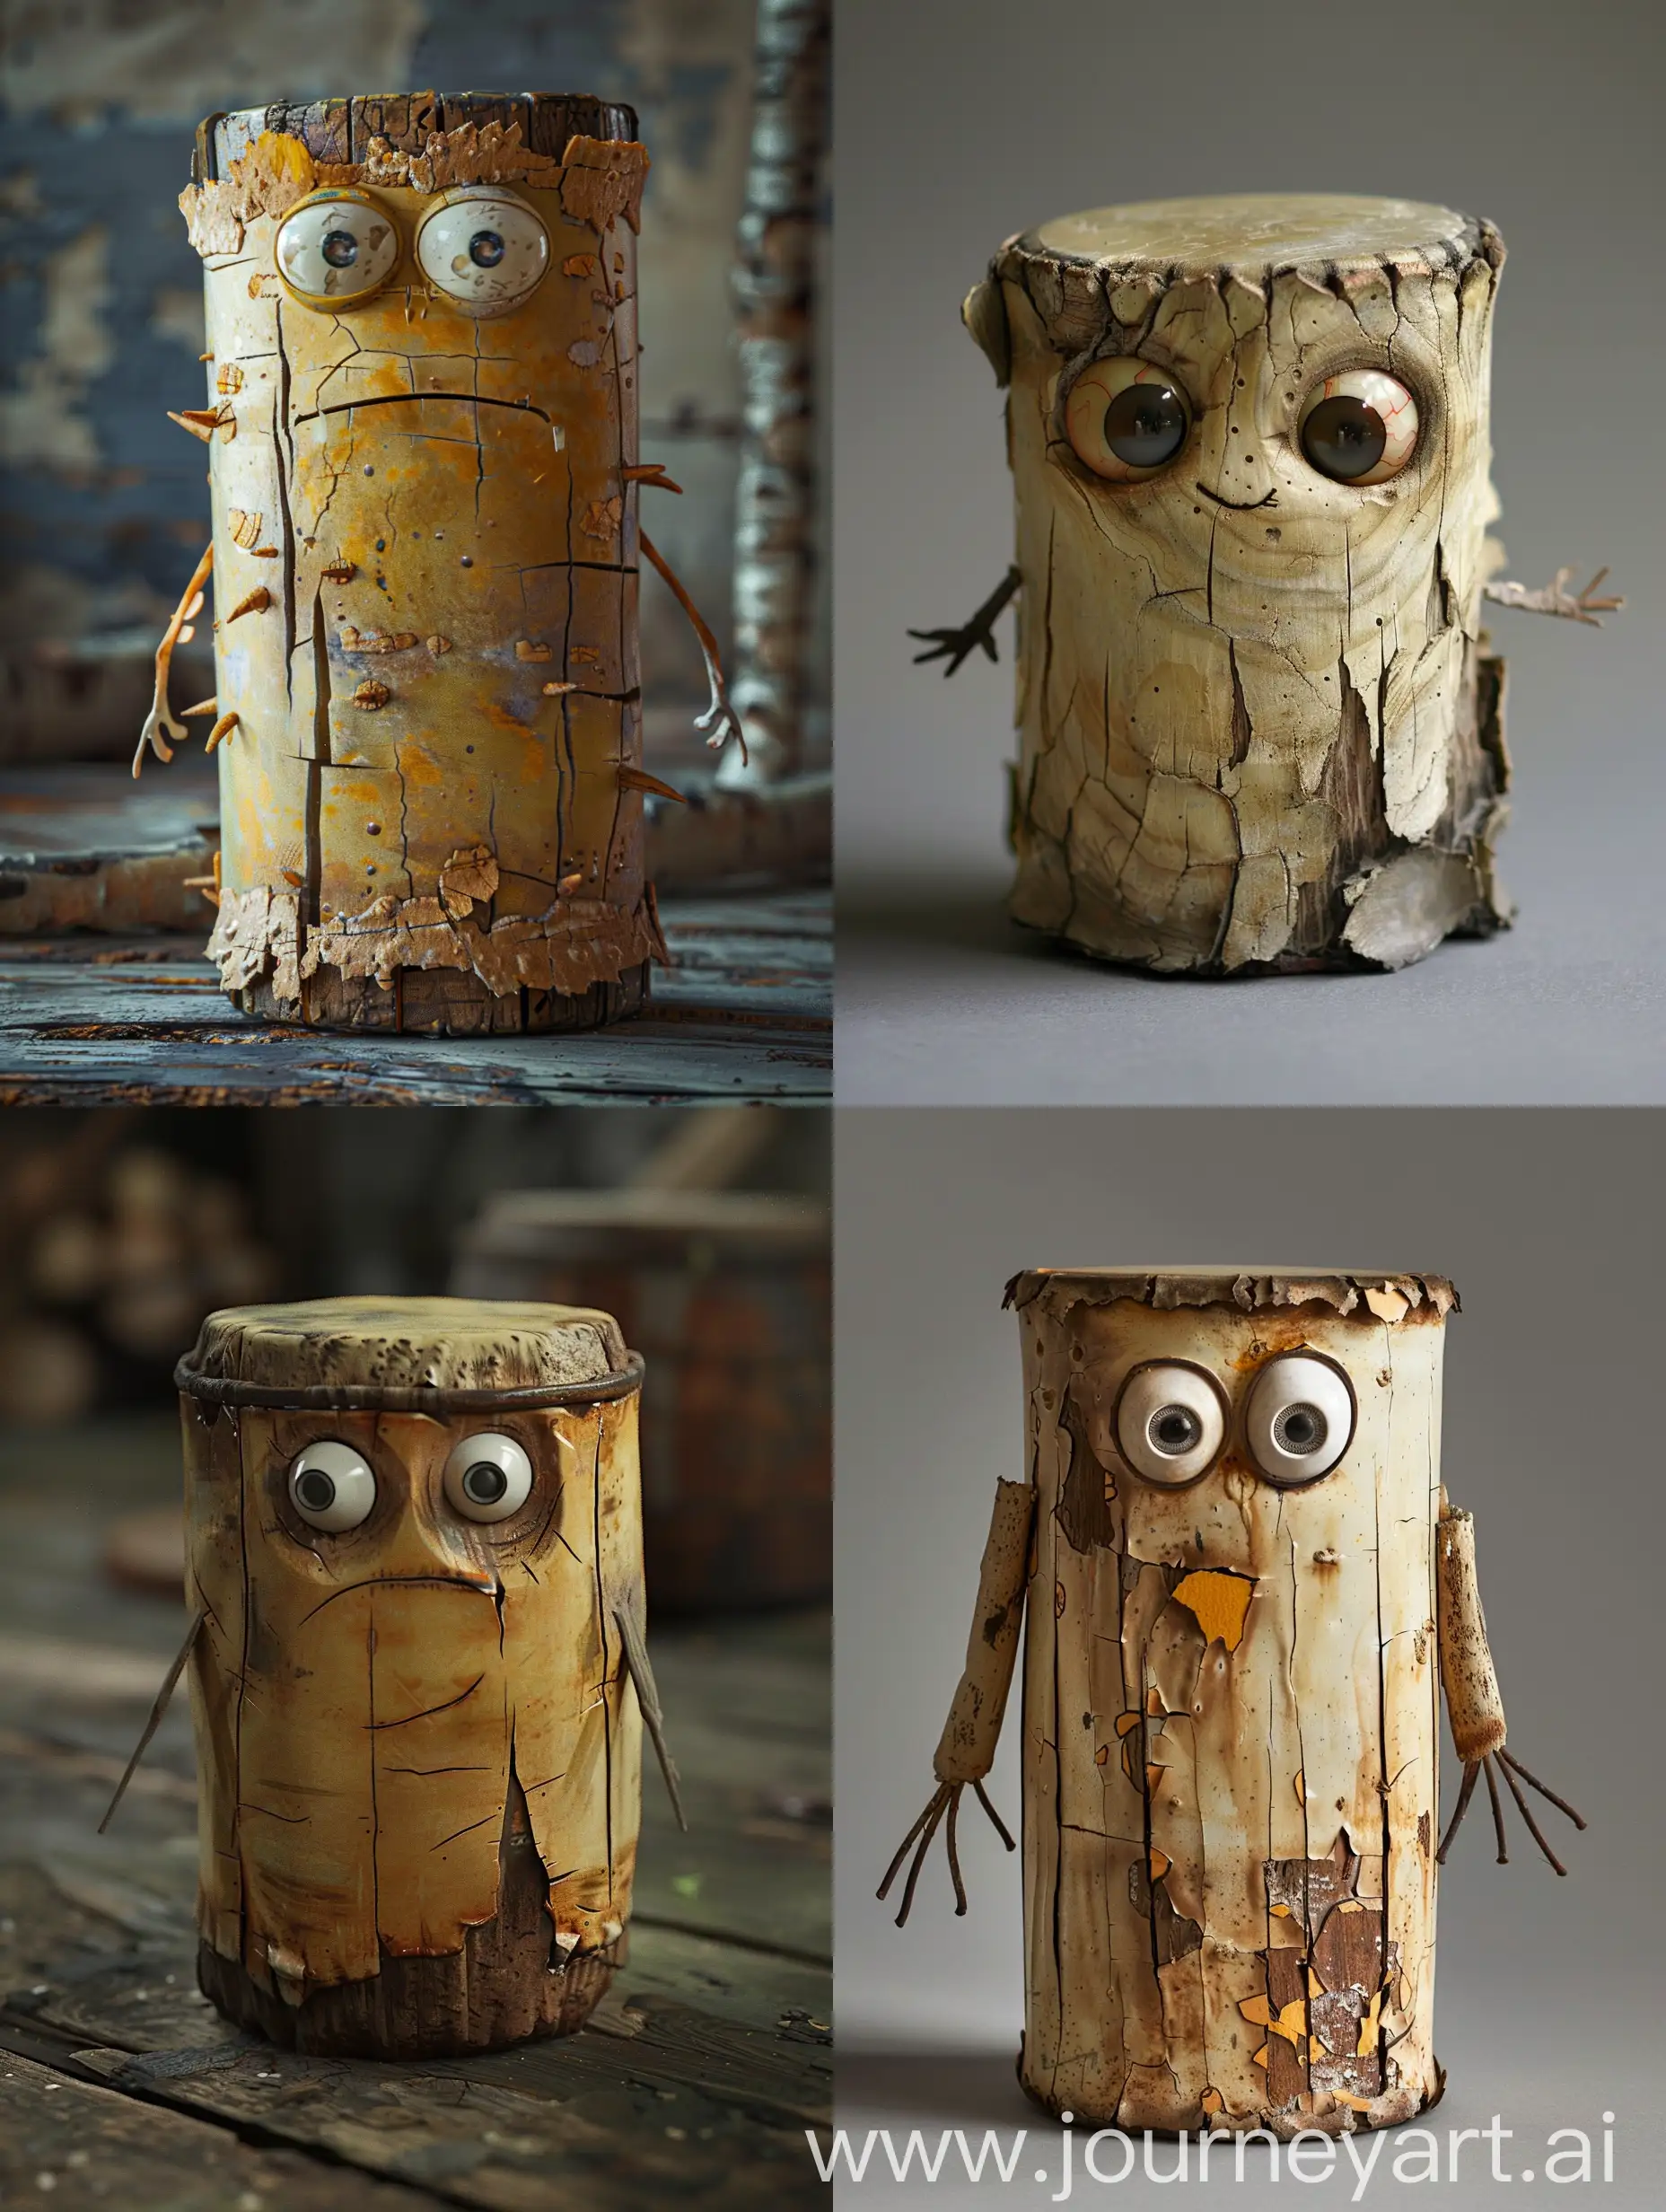 Quirky-Drum-Character-with-Personality-and-Weathered-Appearance